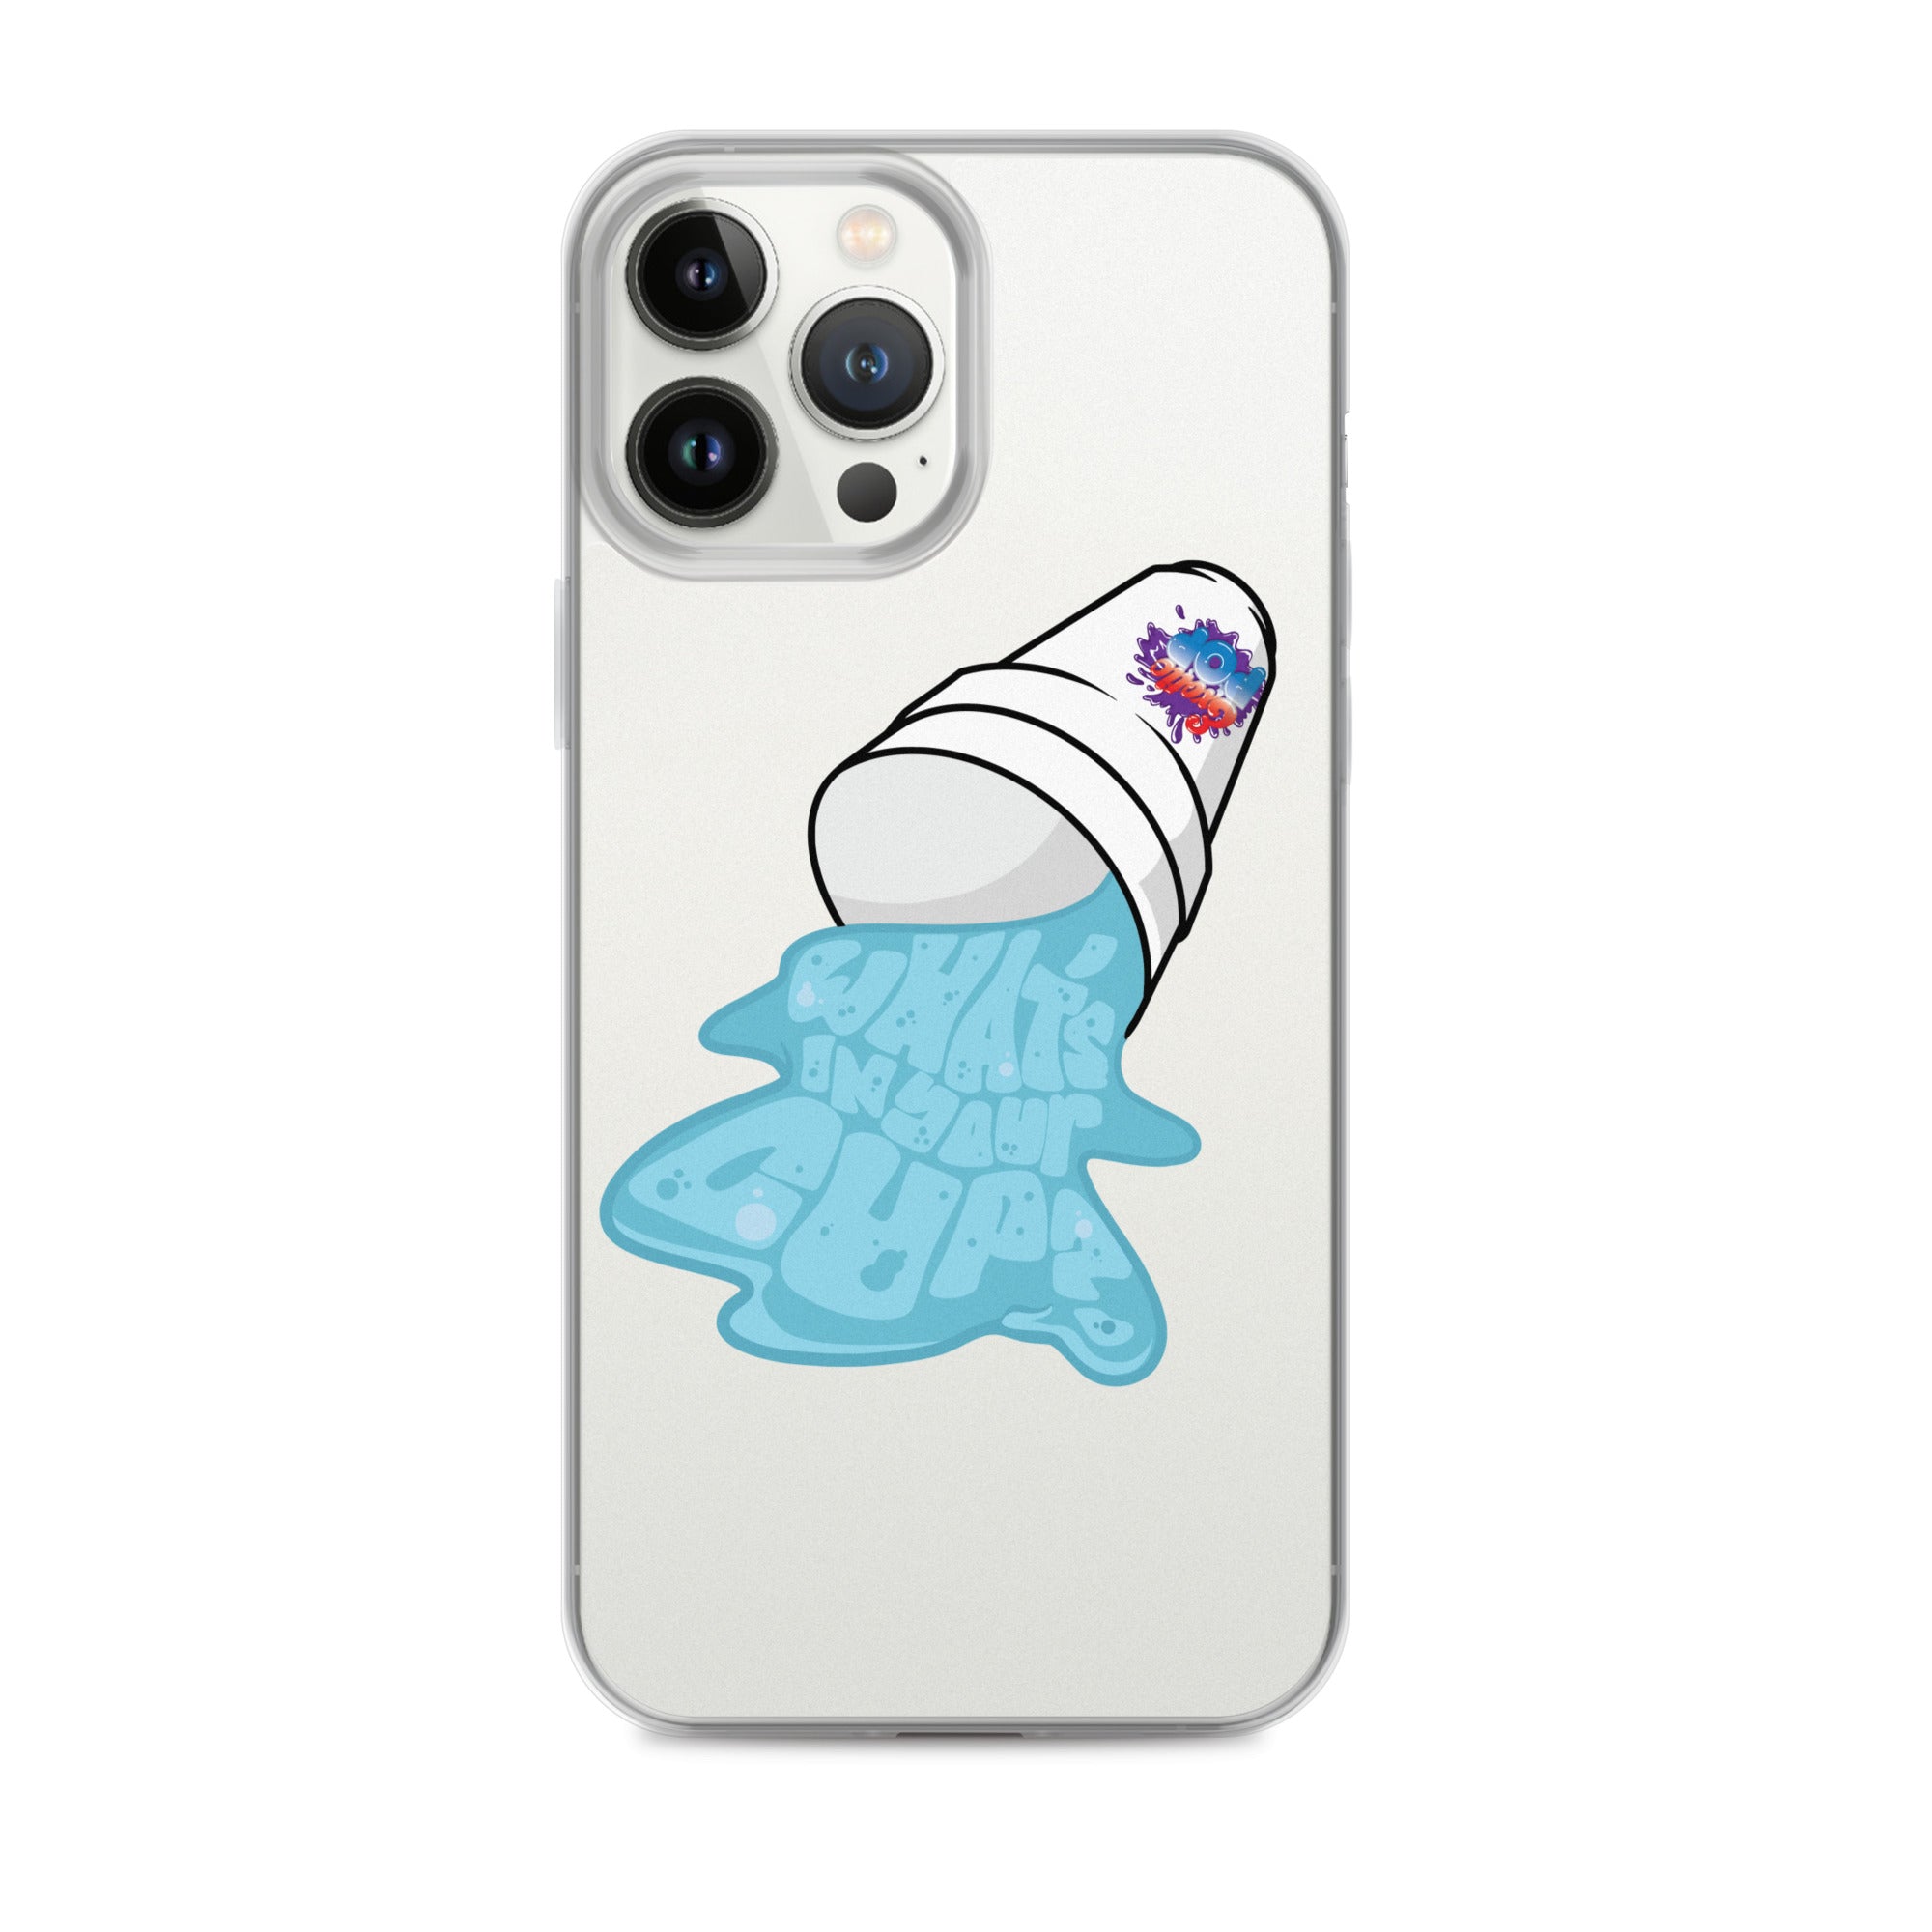 What's In Your Cup? iPhone Cases